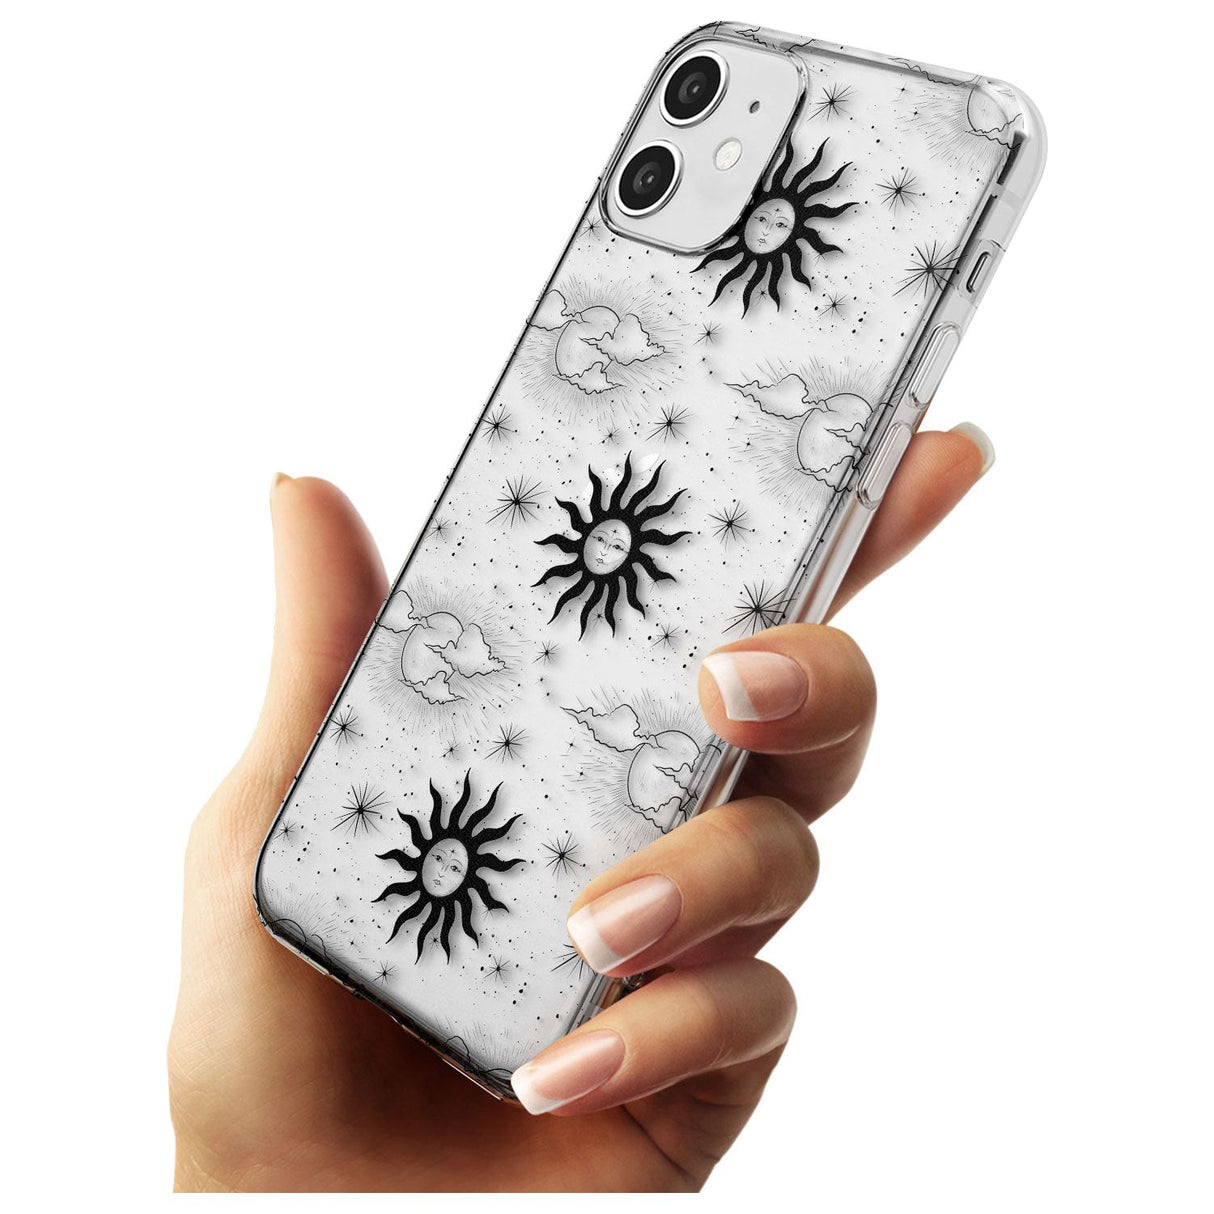 Suns & Clouds Vintage Astrological Slim TPU Phone Case for iPhone 11